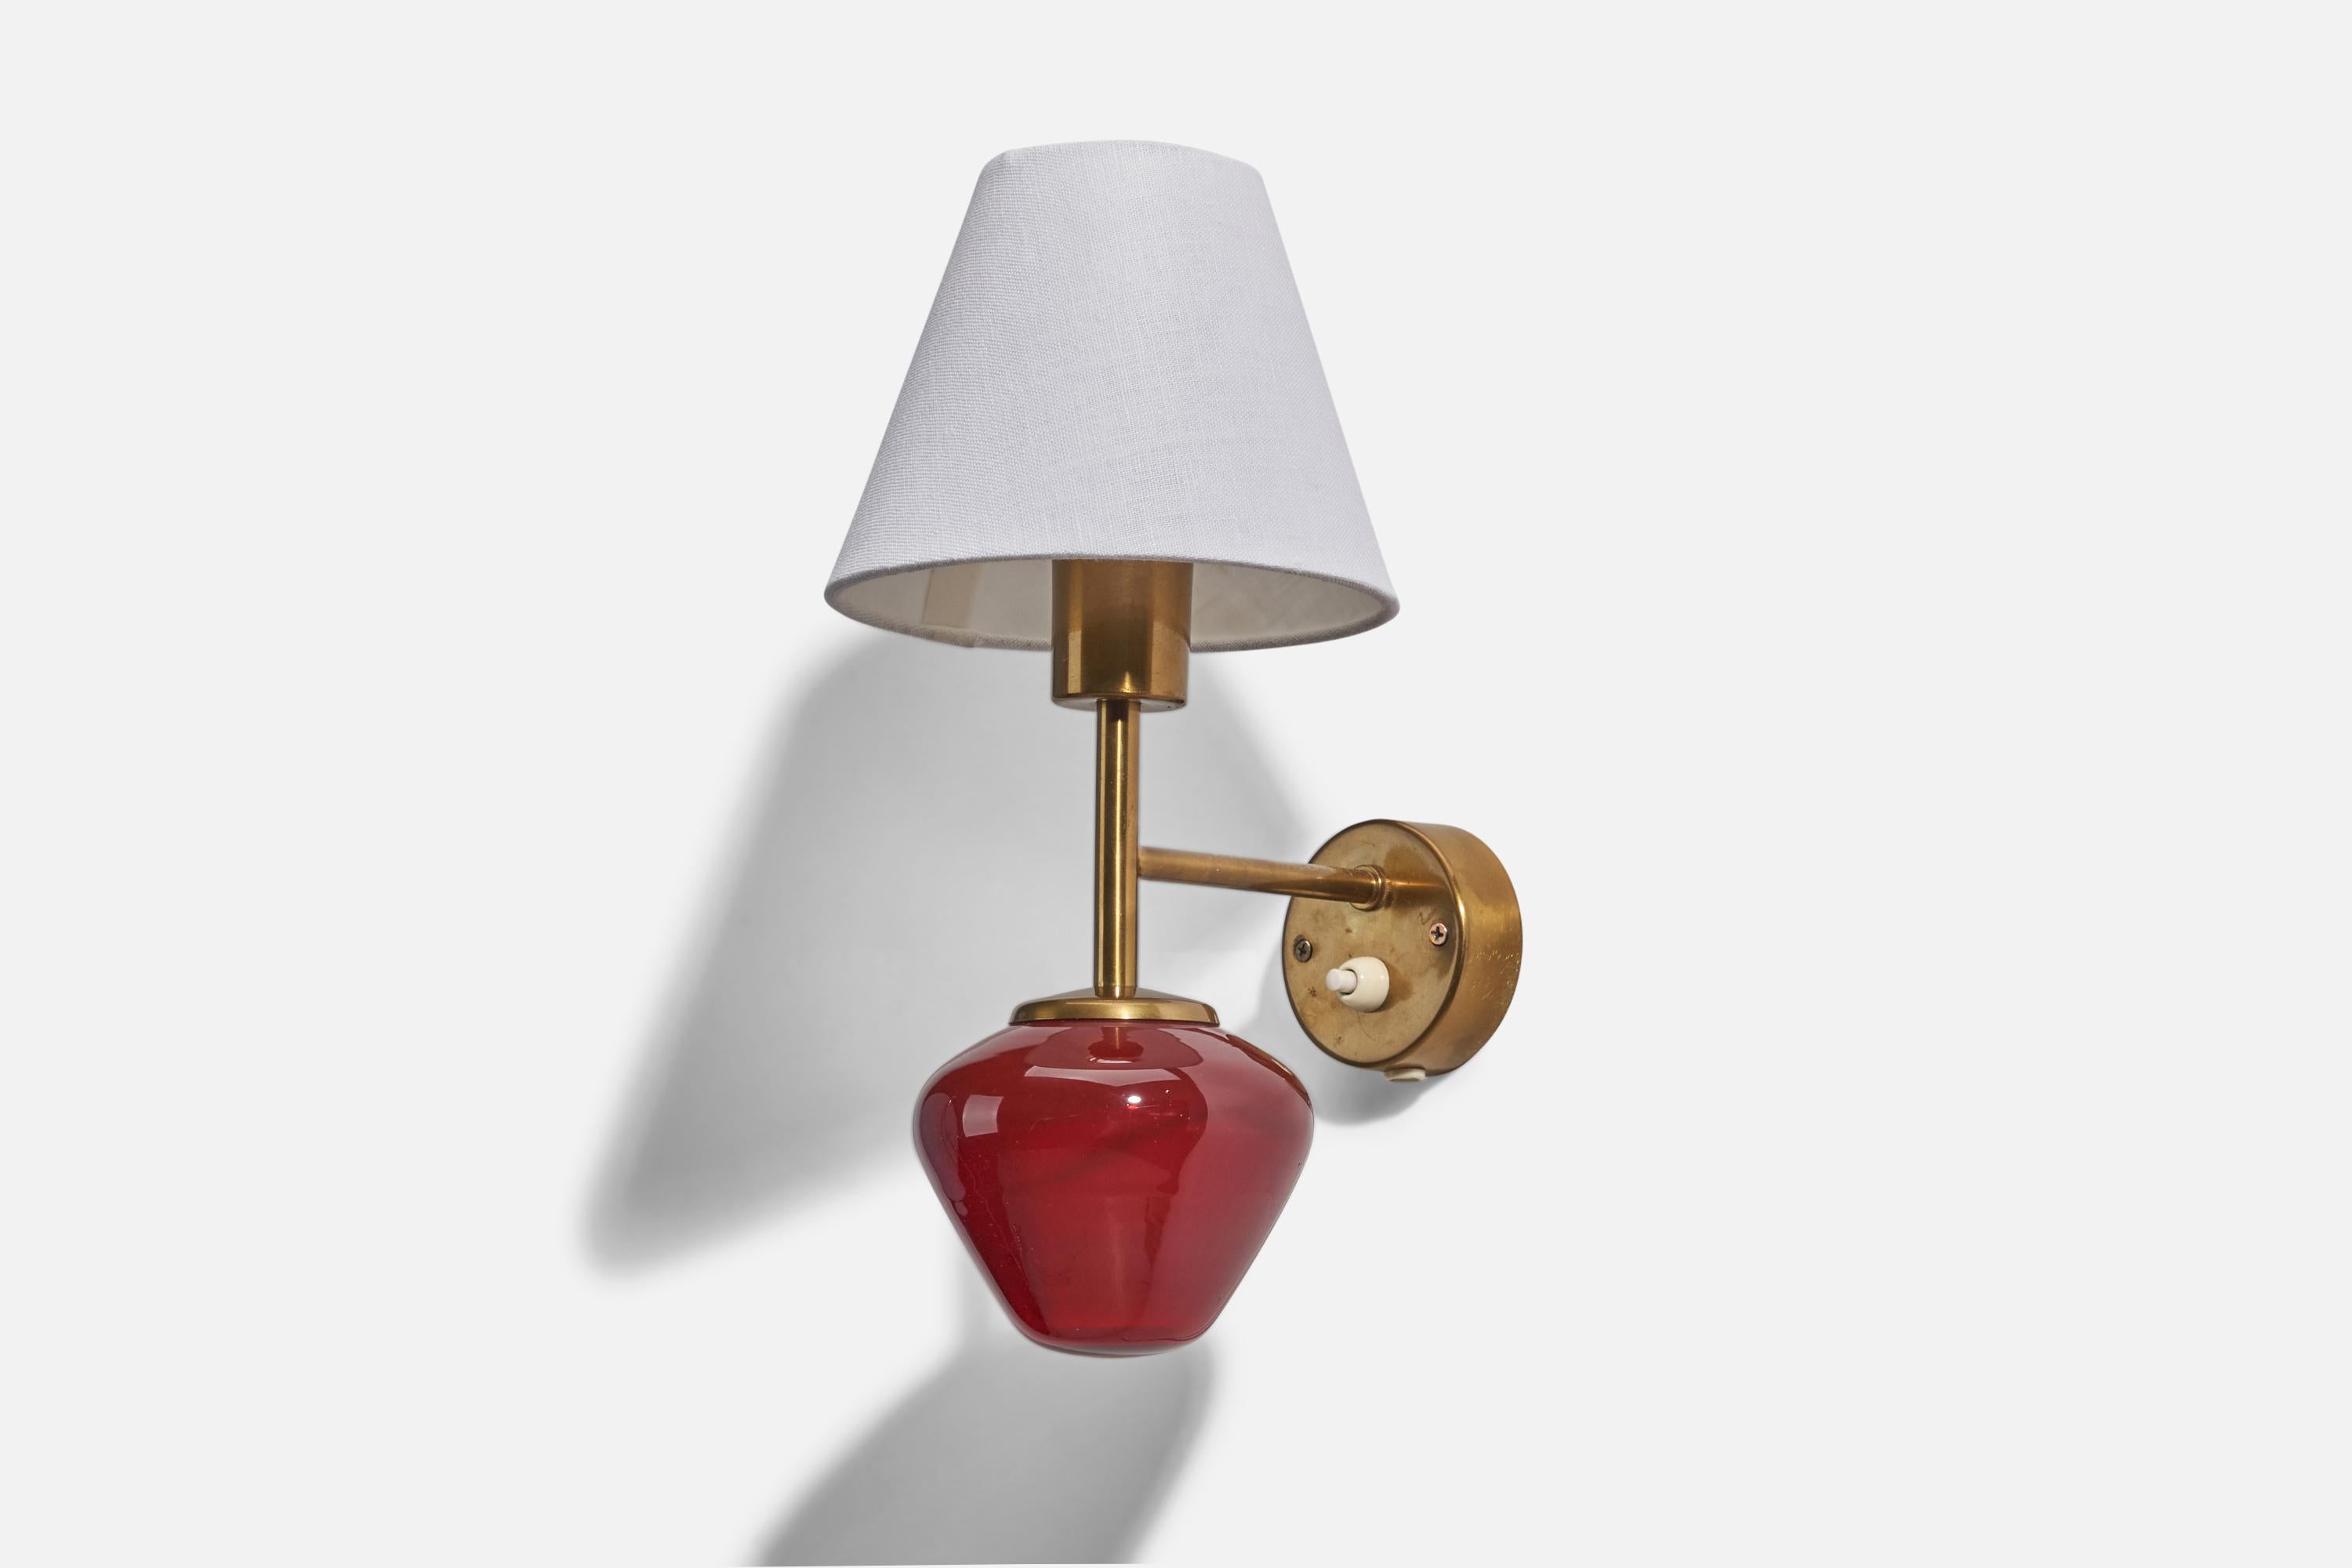 A brass, red glass and white fabric sconce designed and produced by Hans-Agne Jakobsson, Sweden, 1960s.

Sold with Lampshade. Dimensions stated are of Sconce with Lampshade.

Dimensions of Back Plate (inches) : 2.83 x 2.83 x 0.97 (Height x Width x